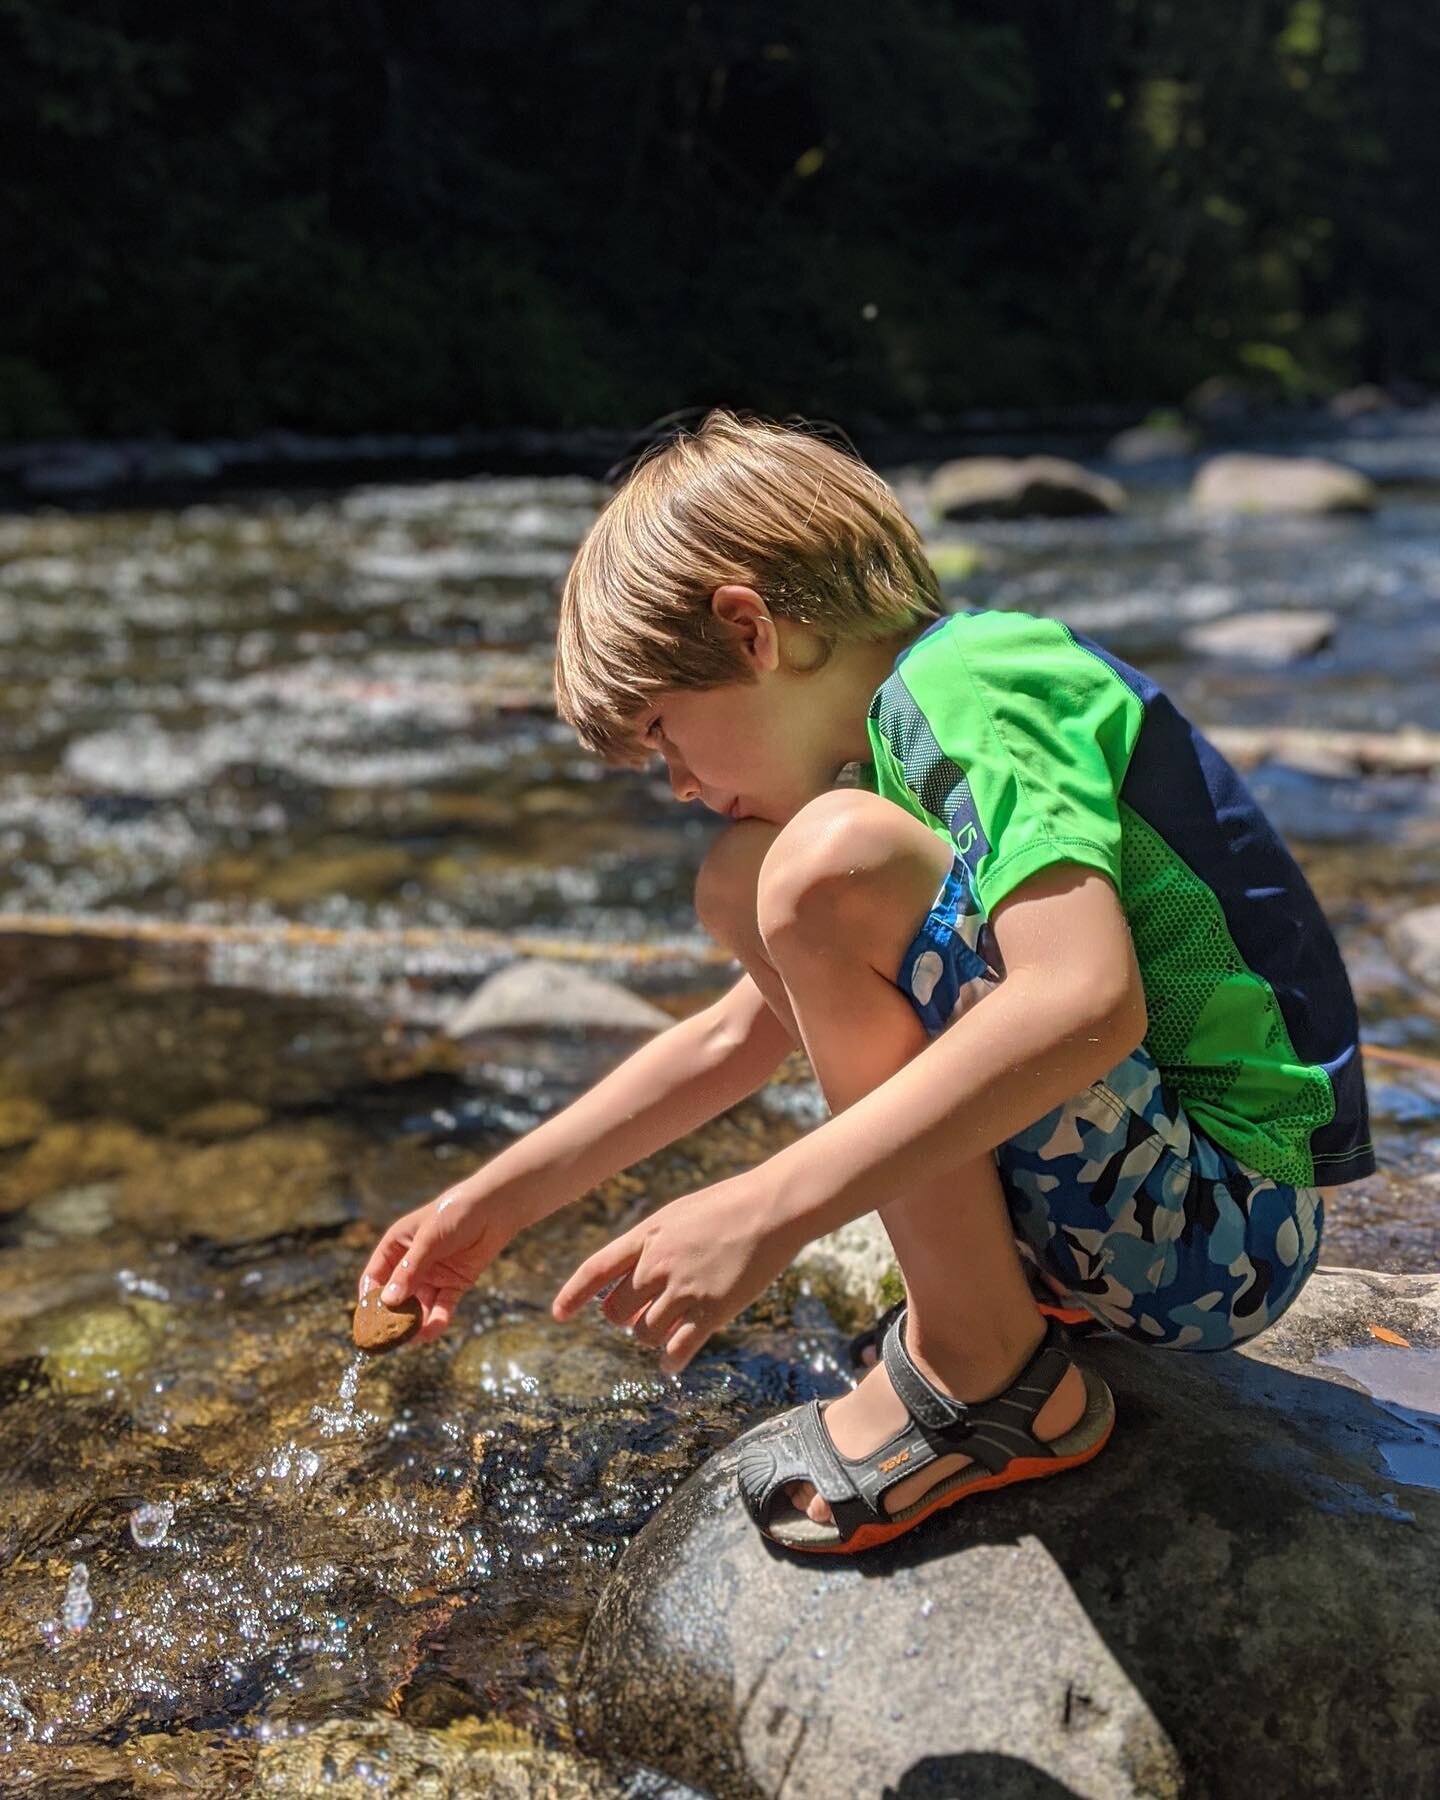 Use time in nature to practice mindfulness.  Engaging the senses in this way is so helpful for emotional regulation. It also teaches observation skills that are key to many fields of study, including science and art. Describing these observations out